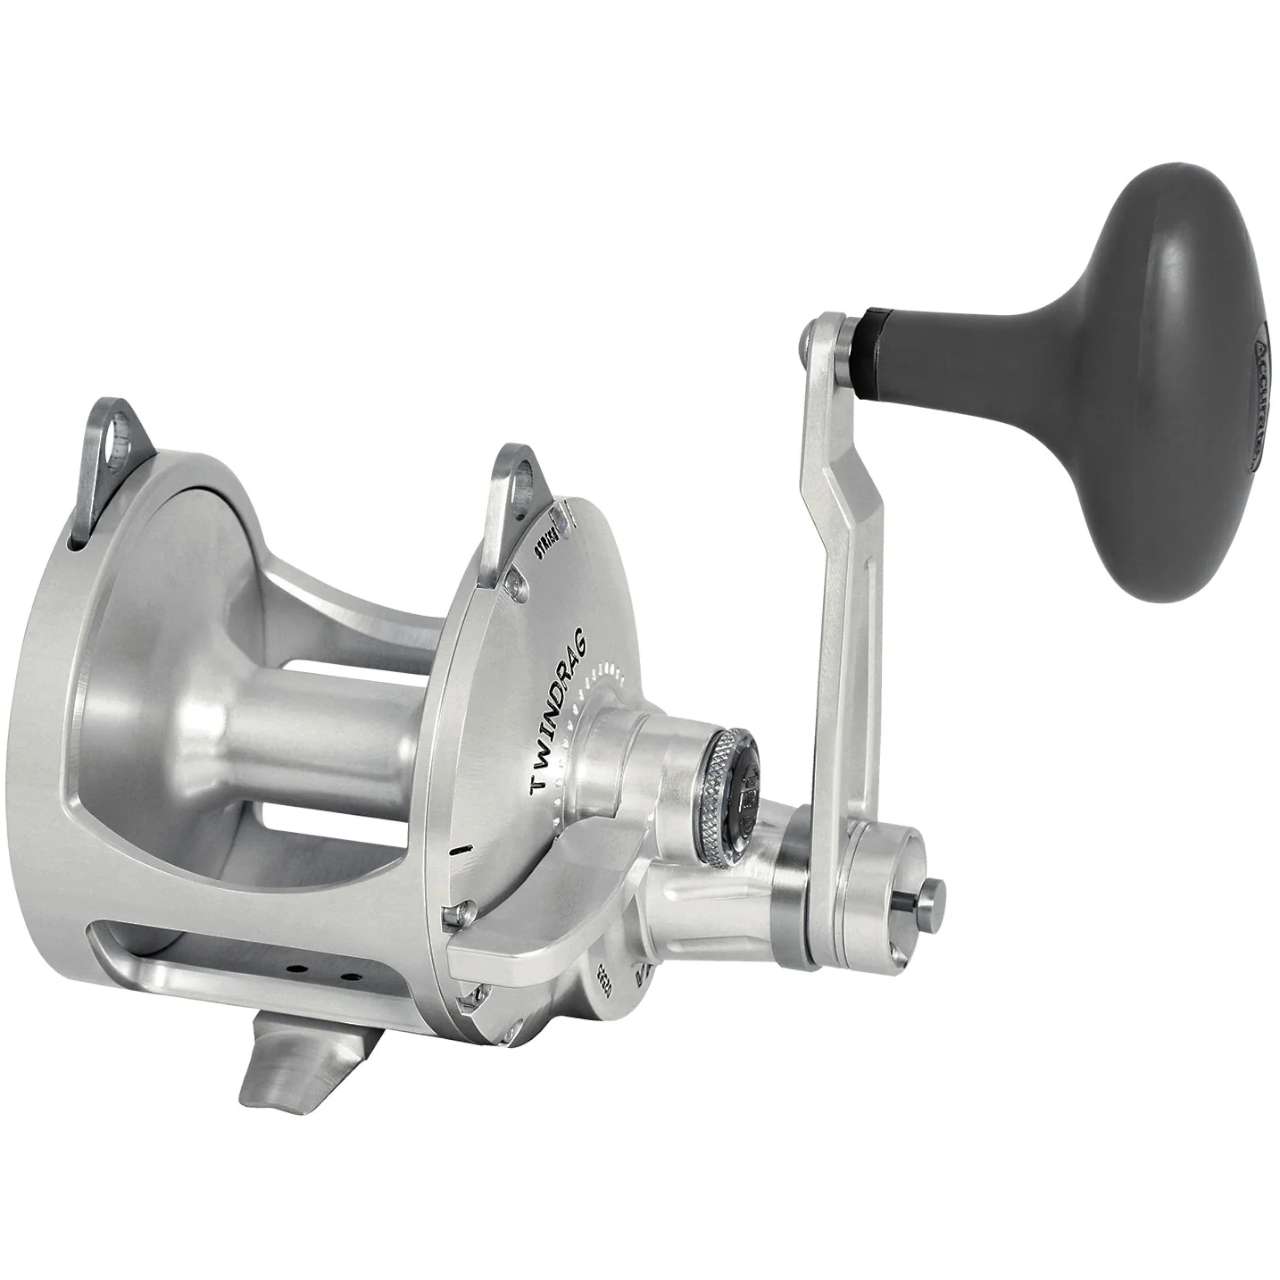 https://i.tackledirect.com/images/imgfull/accurate-bv2-800-boss-valiant-conventional-reels.jpg